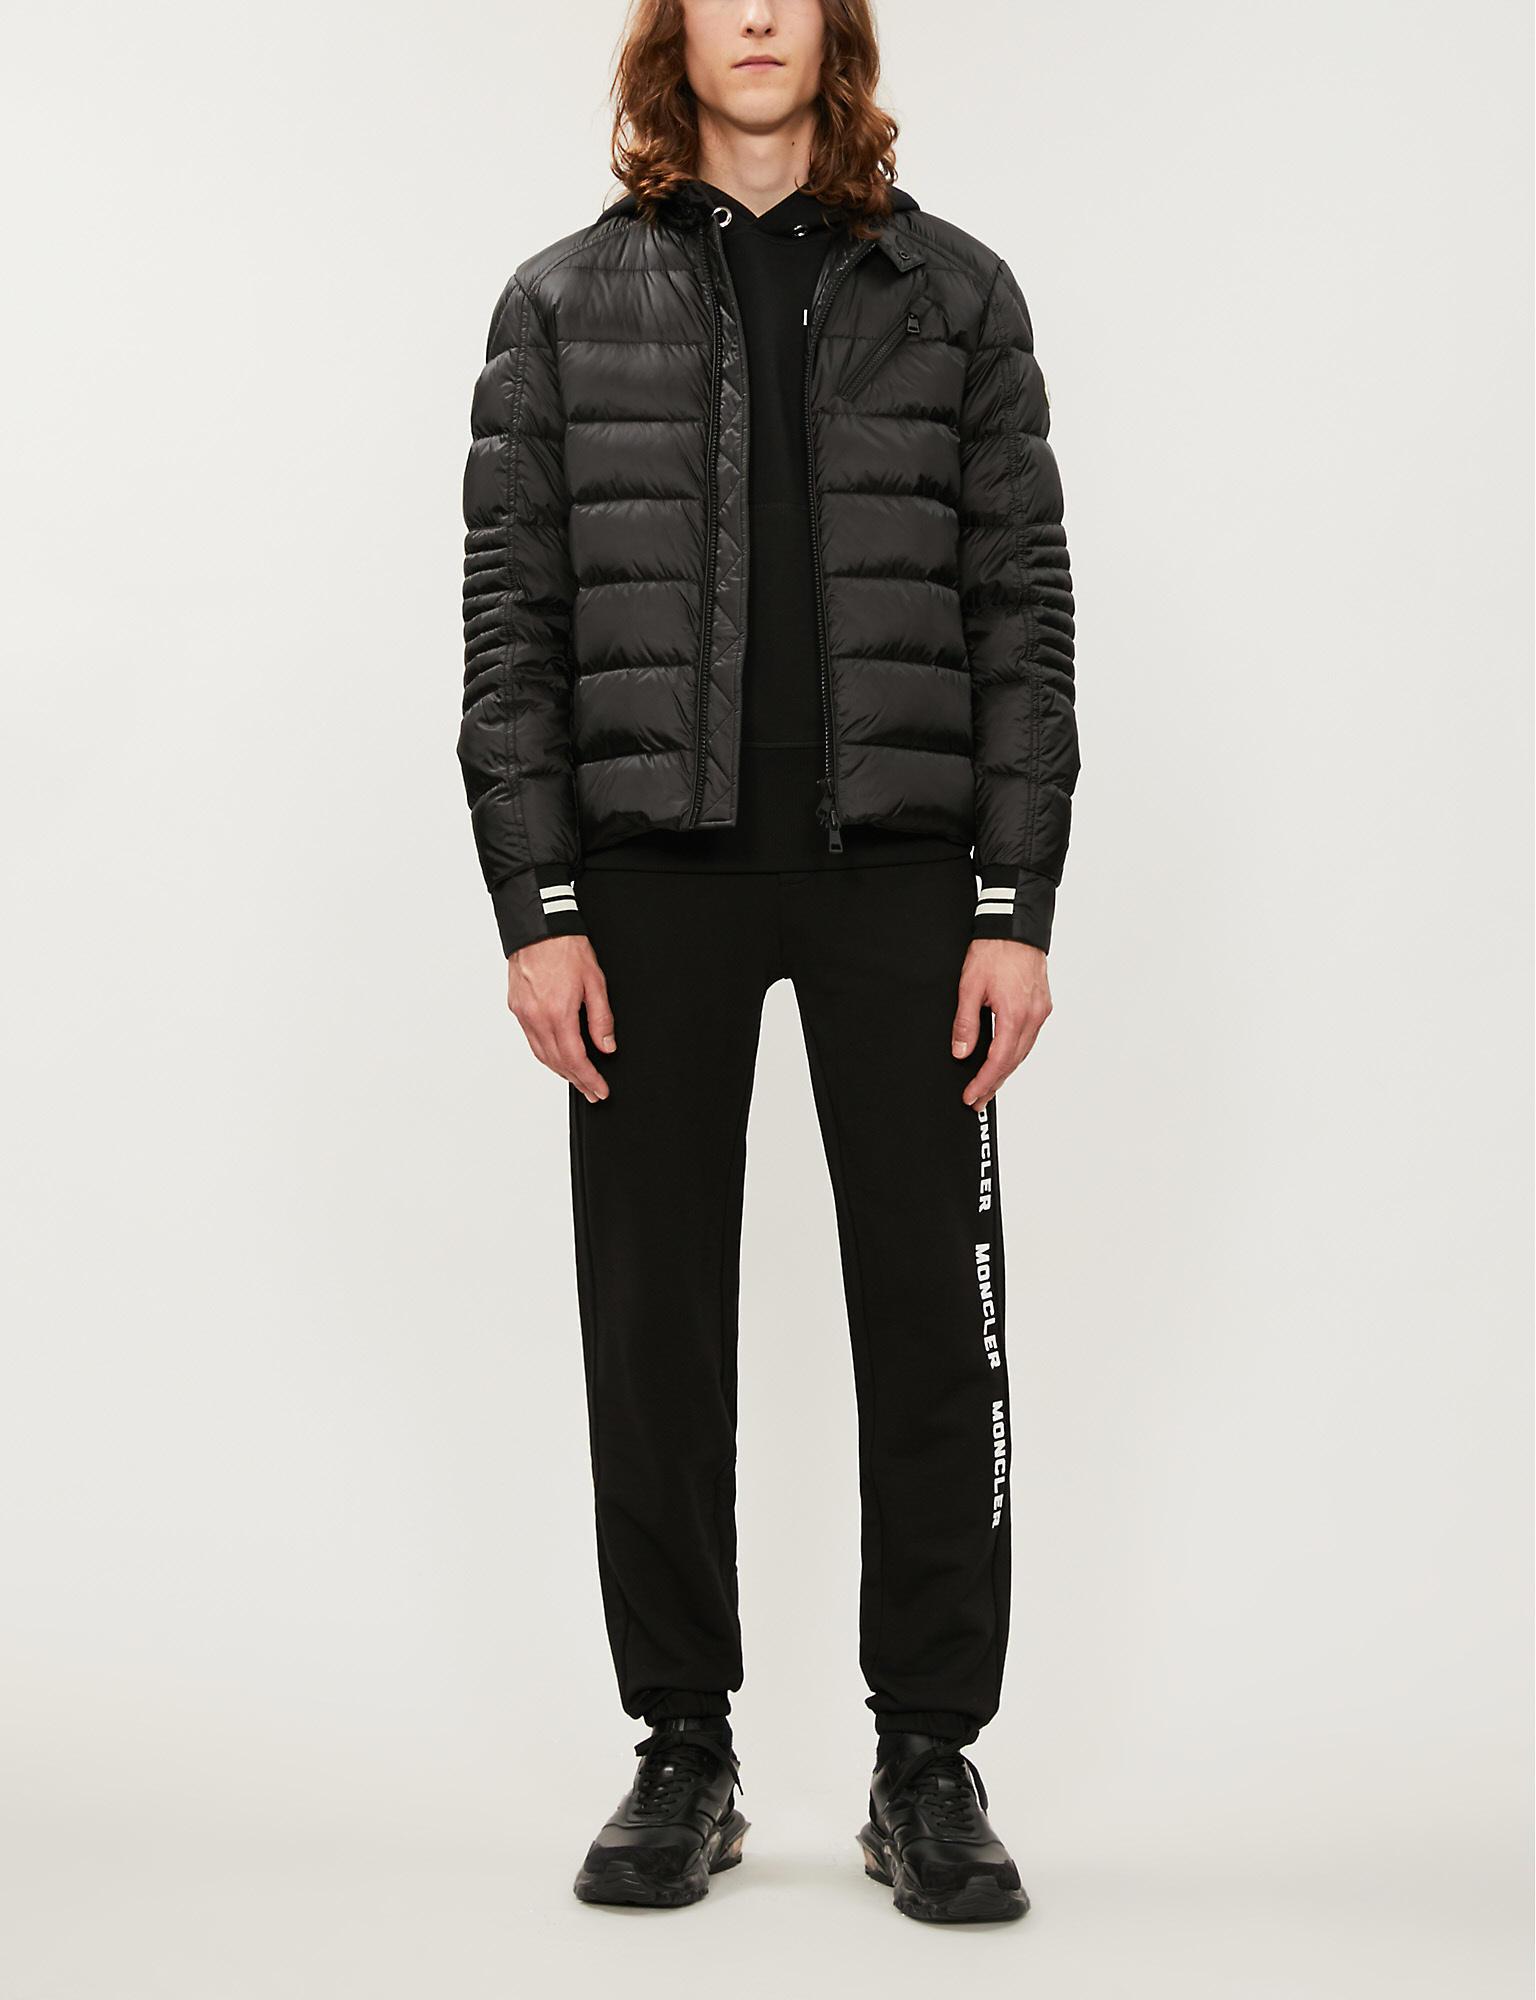 Moncler Synthetic Brel High-neck Brand-patch Nylon Jacket in Black for